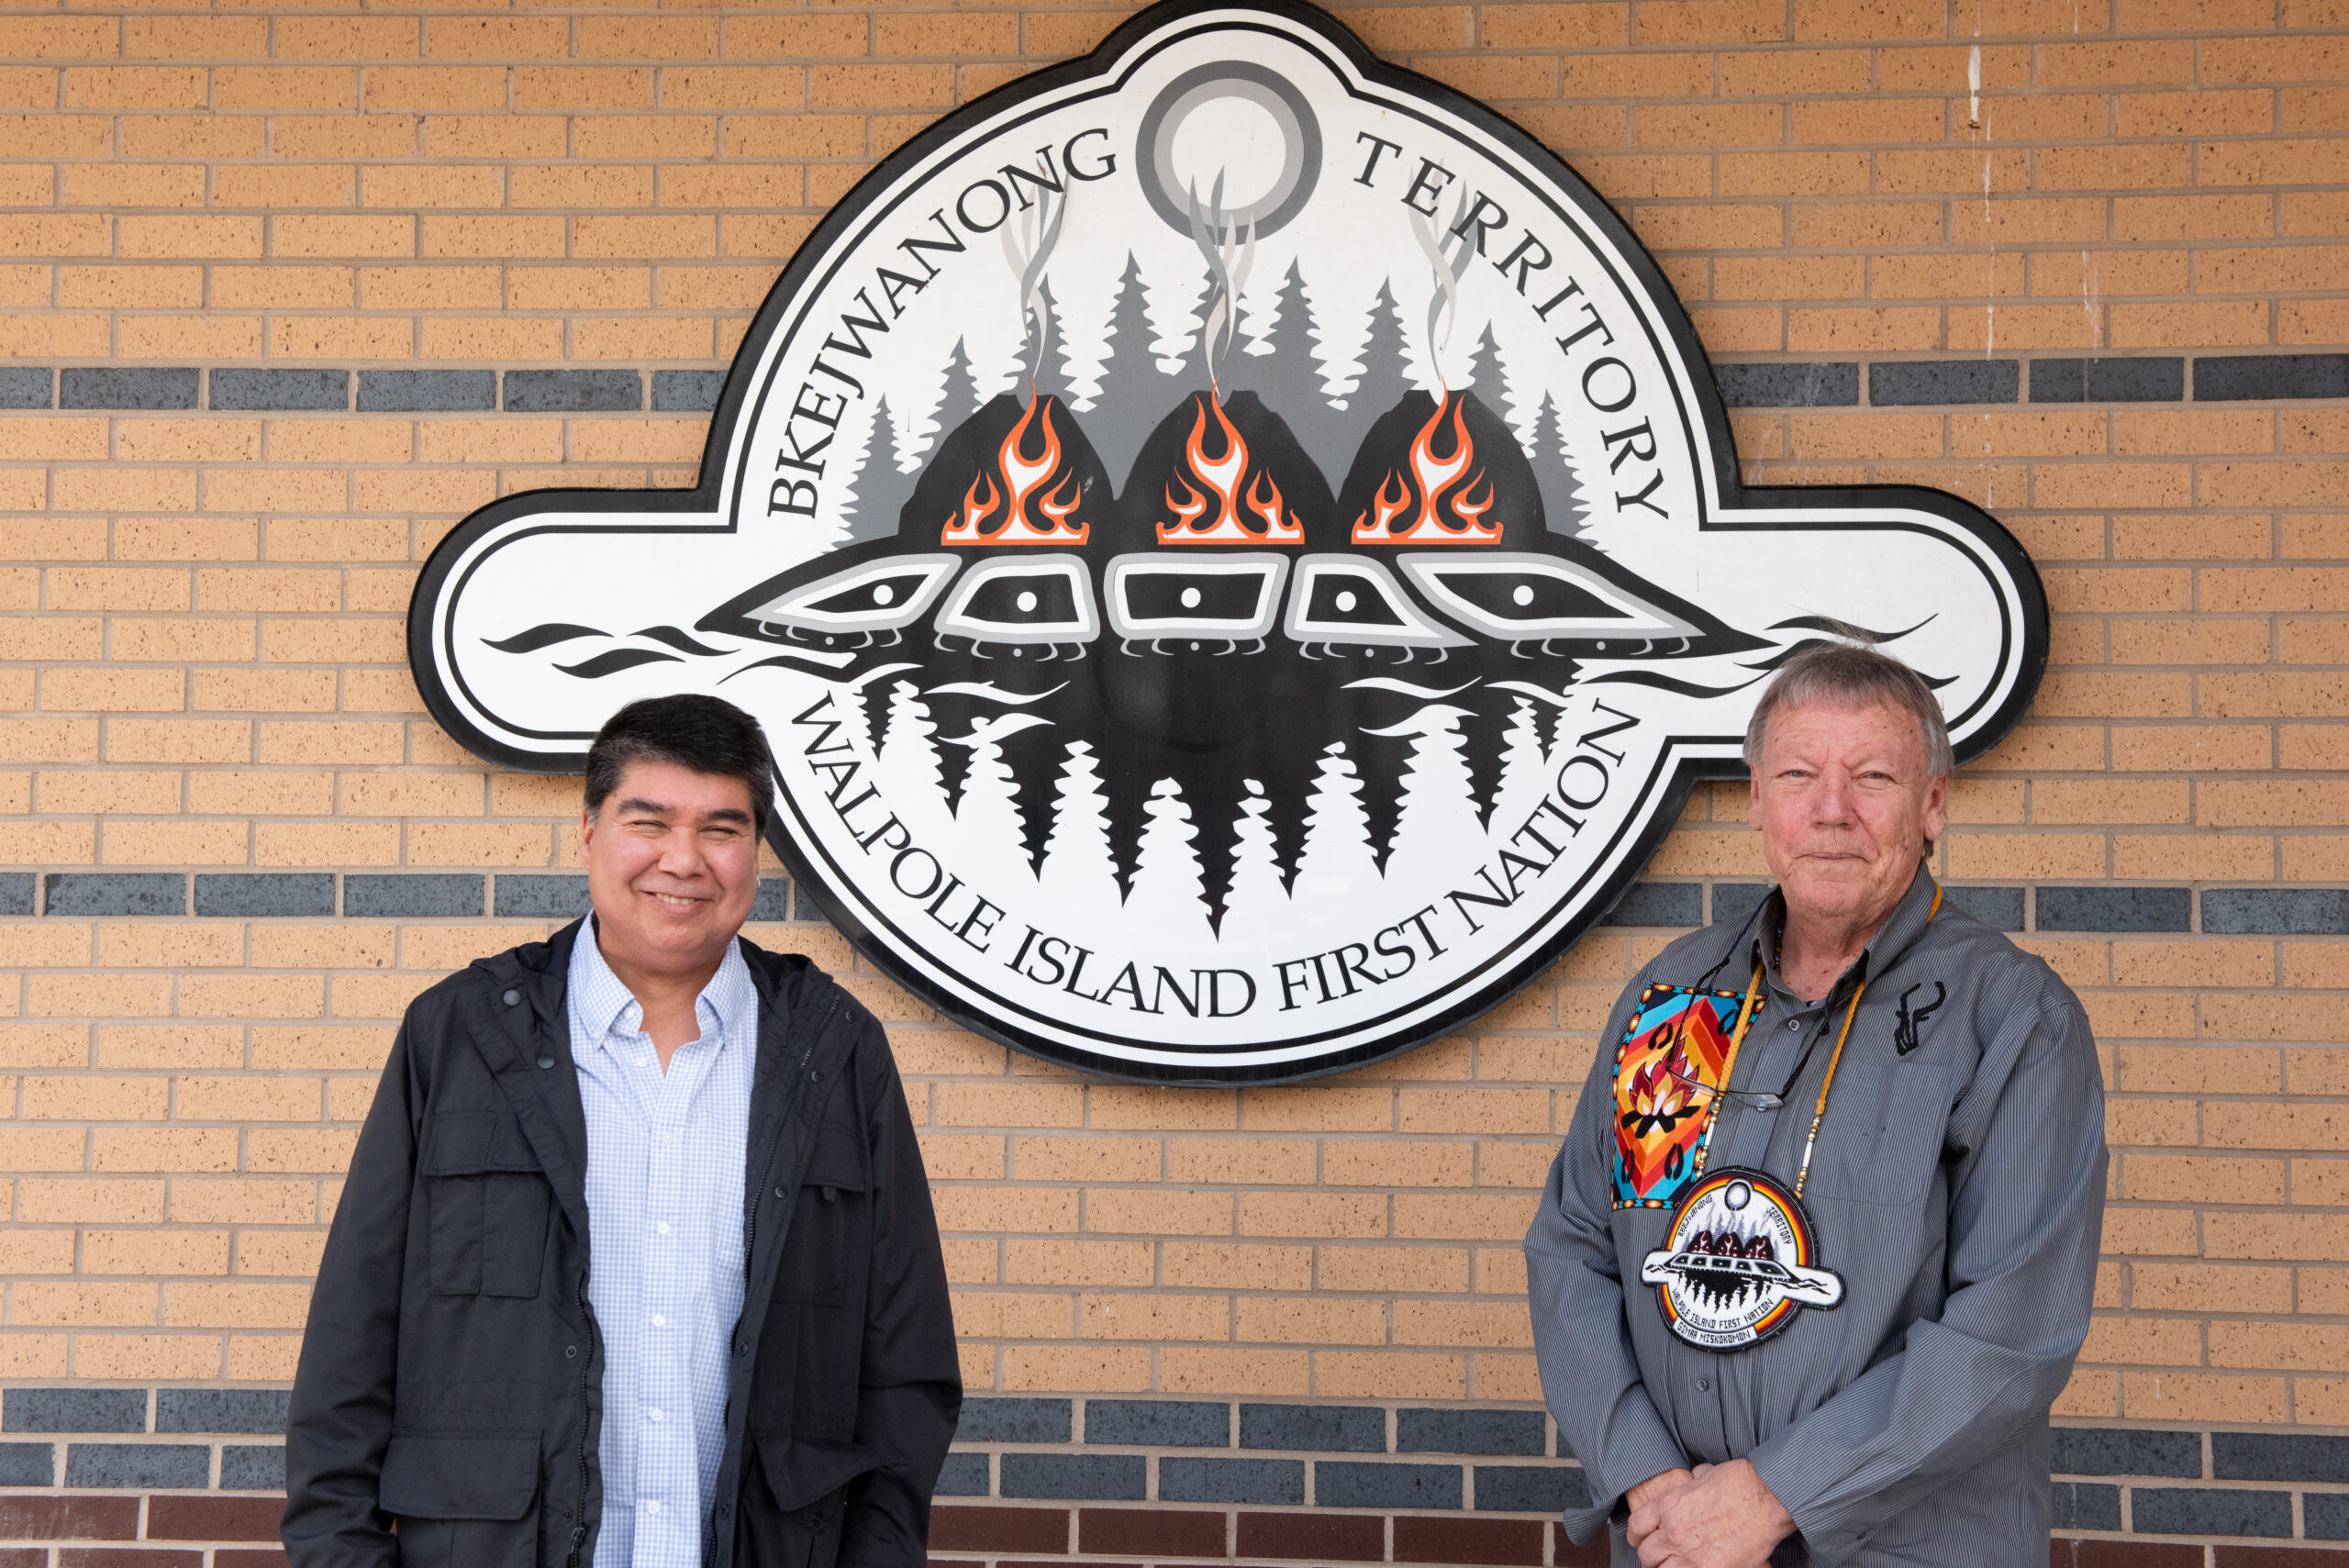 Ojibway National Urban Park: Walpole Island First Nation Chief Dan Miskokomon (right) and Clint Jacobs, the nation's natural heritage coordinator (left) pose for a photo in front of the Walpole Island First Nation sign on a building.